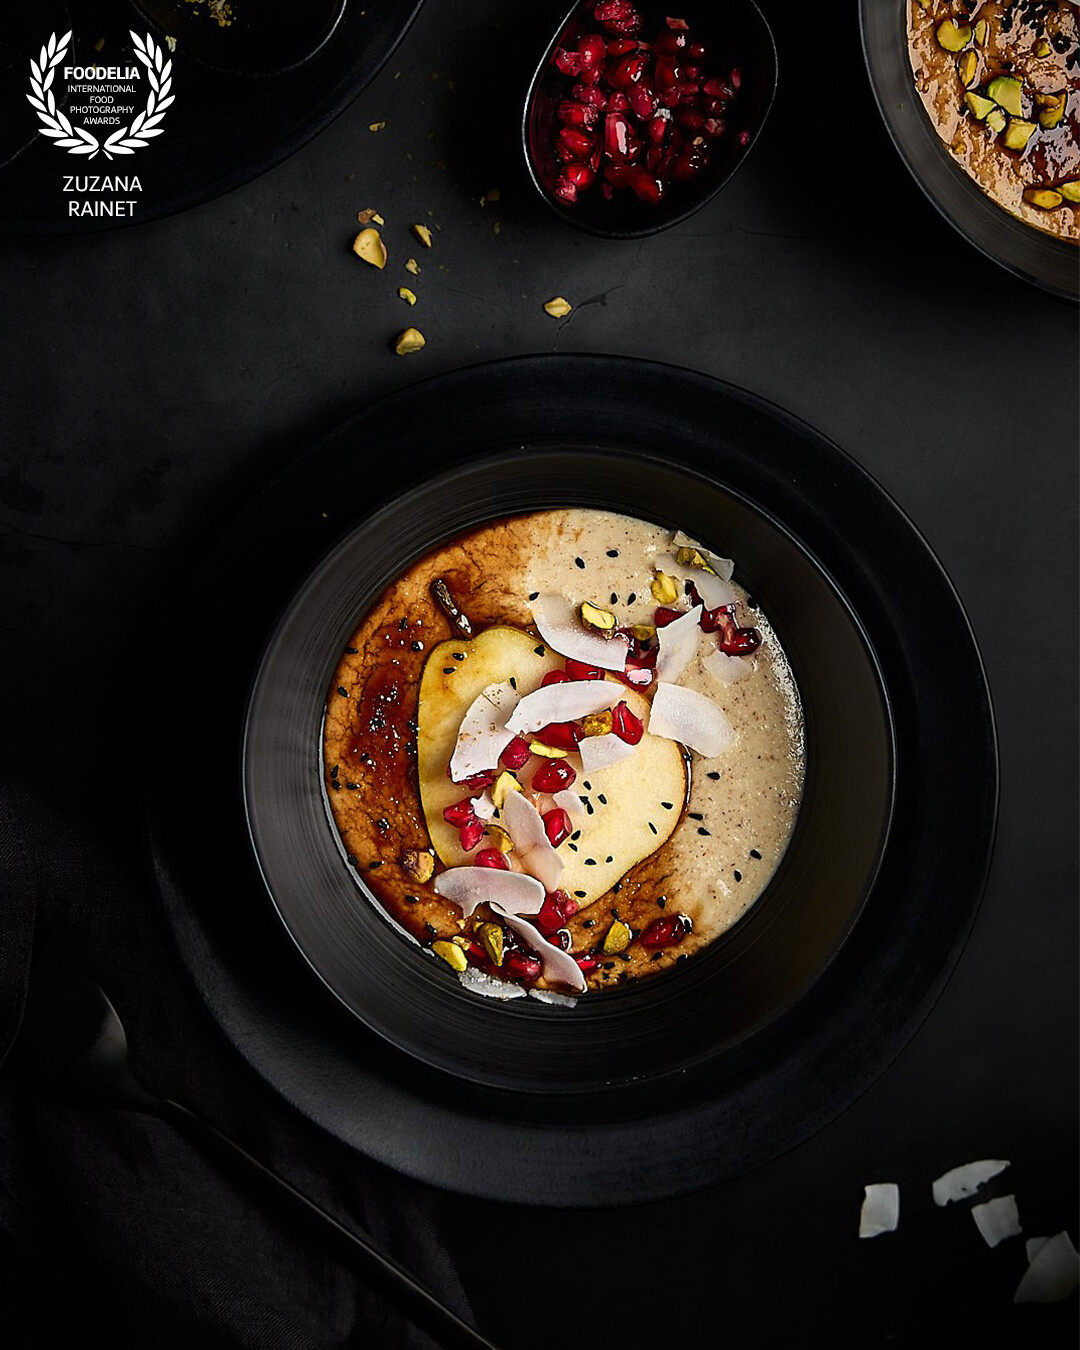 I shot this image for my client Tigernut Planet who produces various products from tigernut plant, such as porridge.  I focused on porridge styling so it looks beautiful and yummy. Image was shot in dark and moody style with studio flash light.